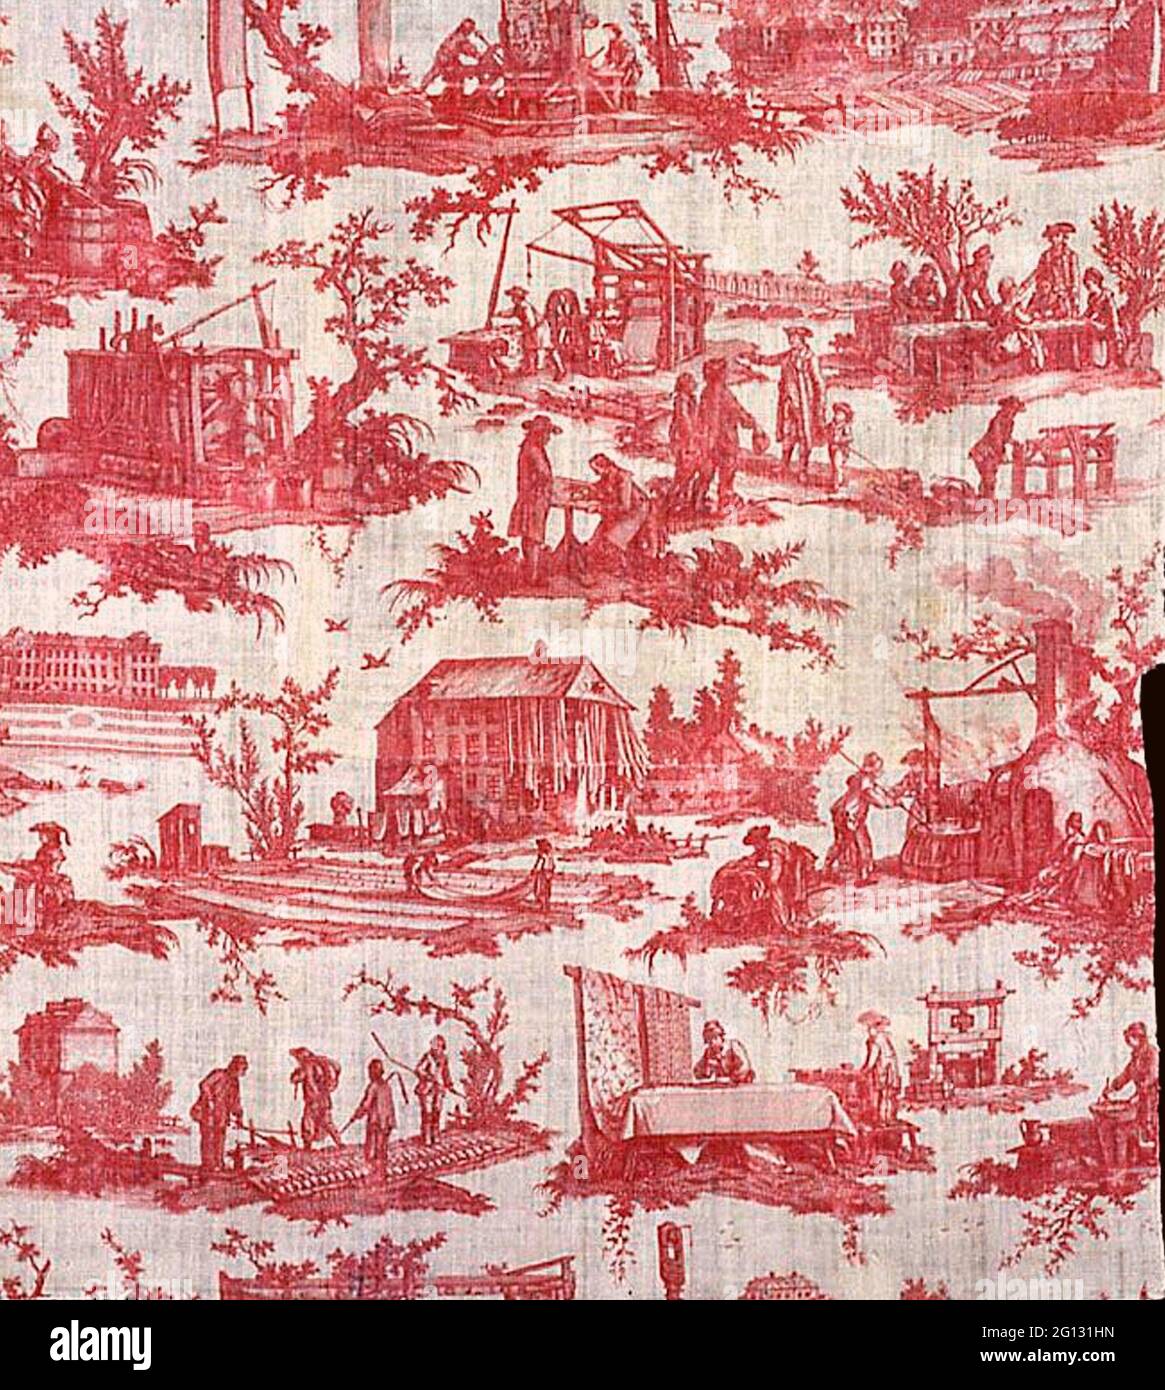 Jean Baptiste Huet. Les Travaux de la Manufacture (The Factory in  Operation) (Furnishing Fabric) - 1783/84 - Designed by Jean Baptiste Huet  (French Stock Photo - Alamy